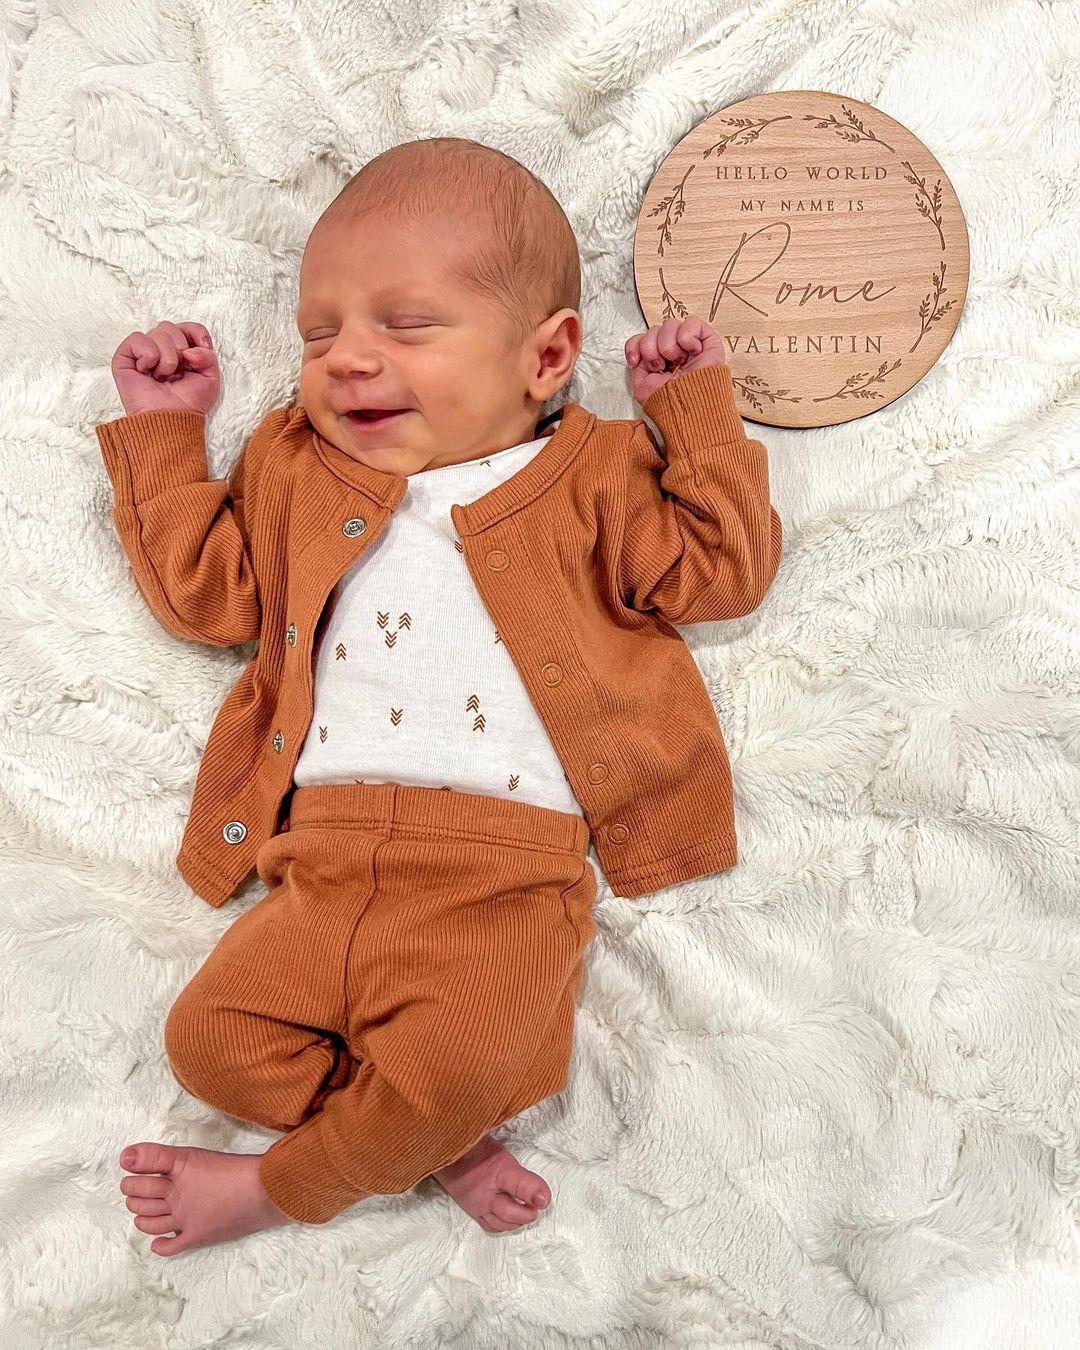 Jenna Johnson Introduces Son To The World 1 Month After His Birth